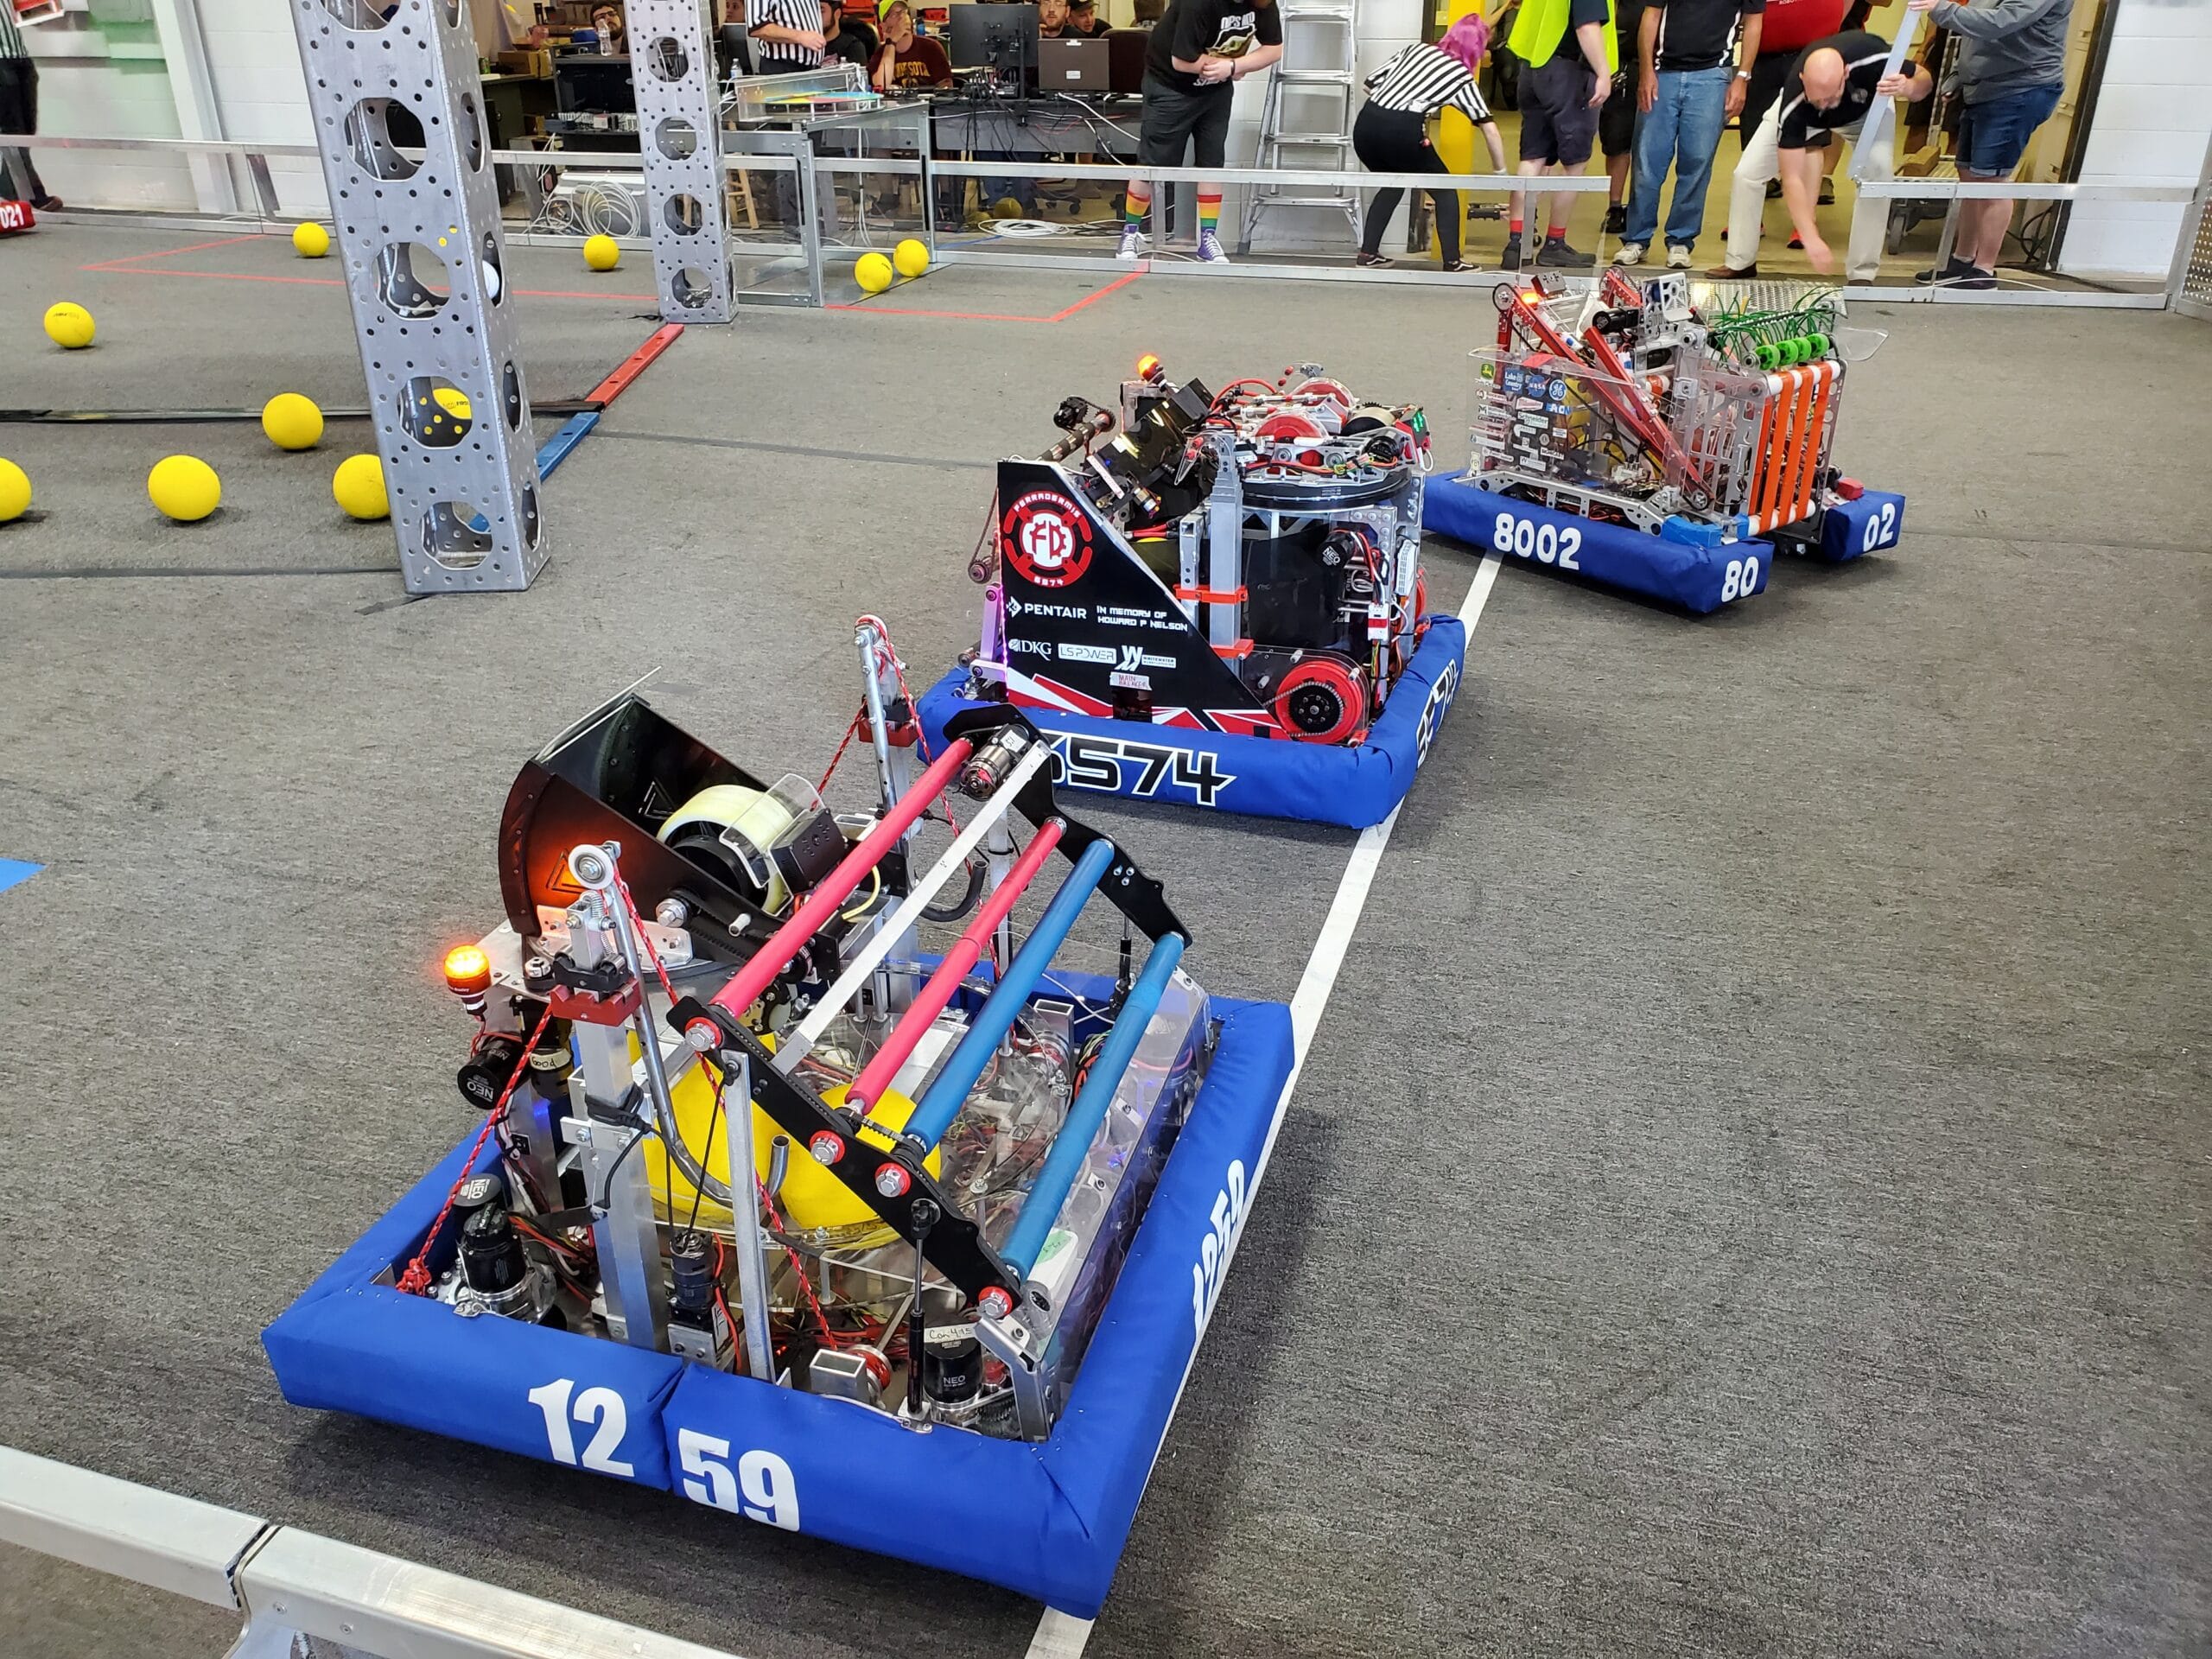 Our Randomly Assigned Alliance for one of the Qualification Matches